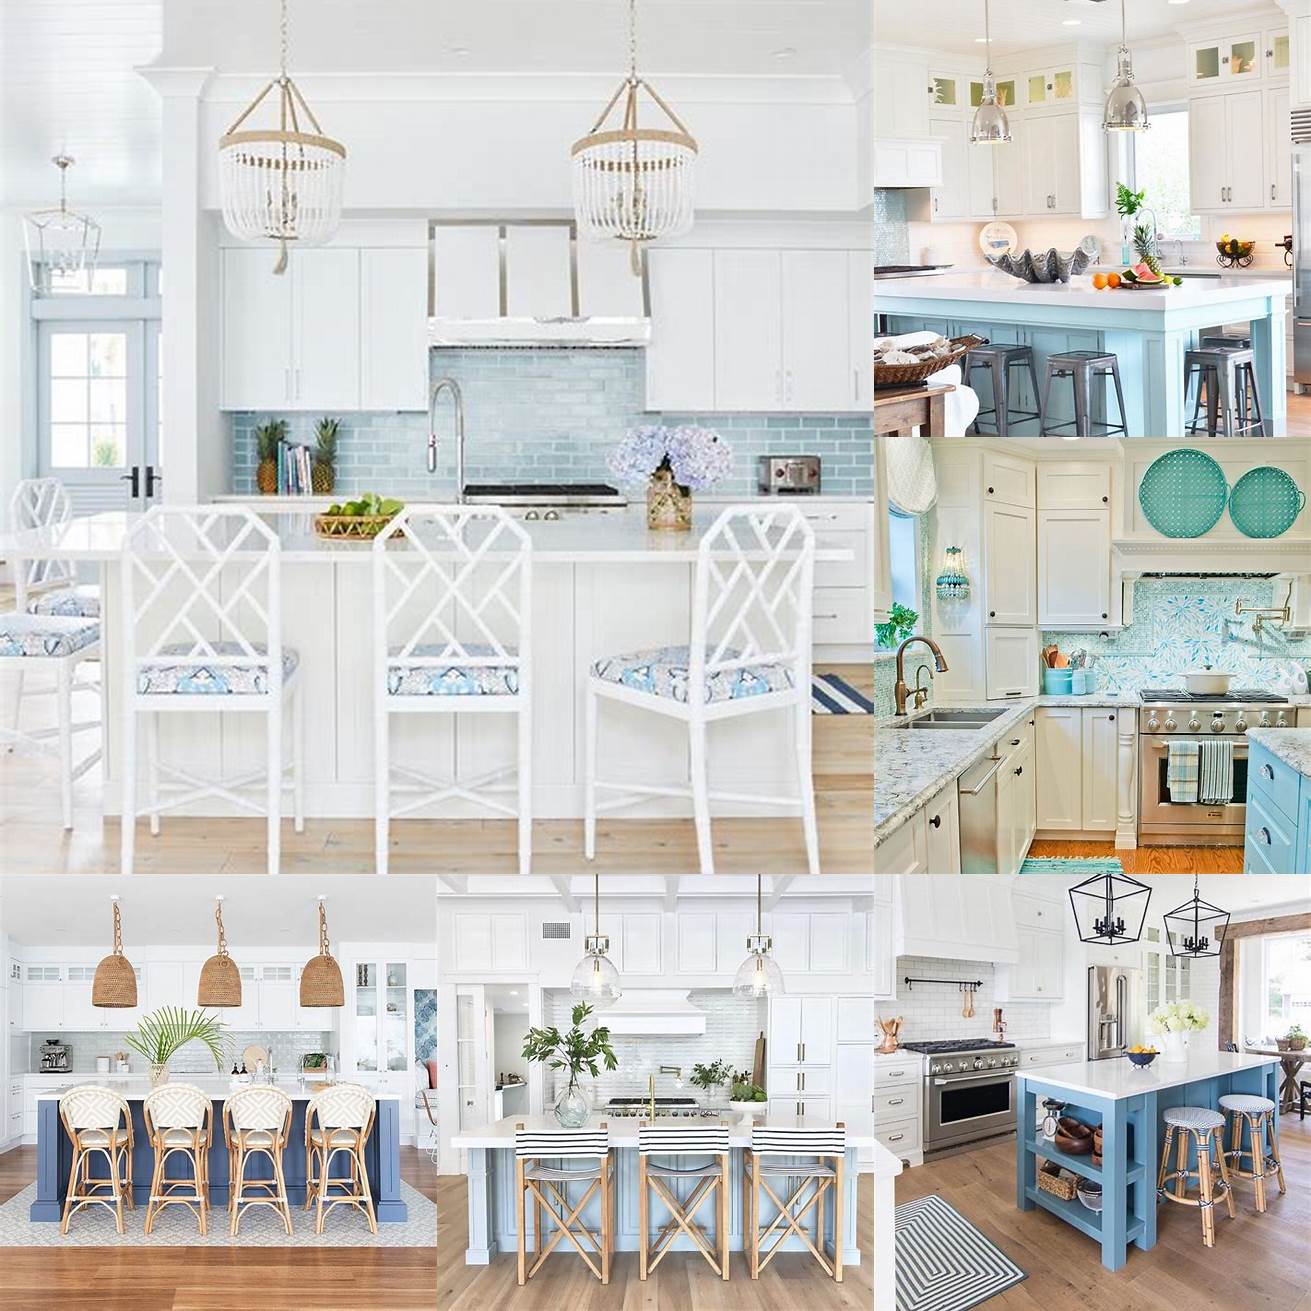 White coastal kitchen with blue accents